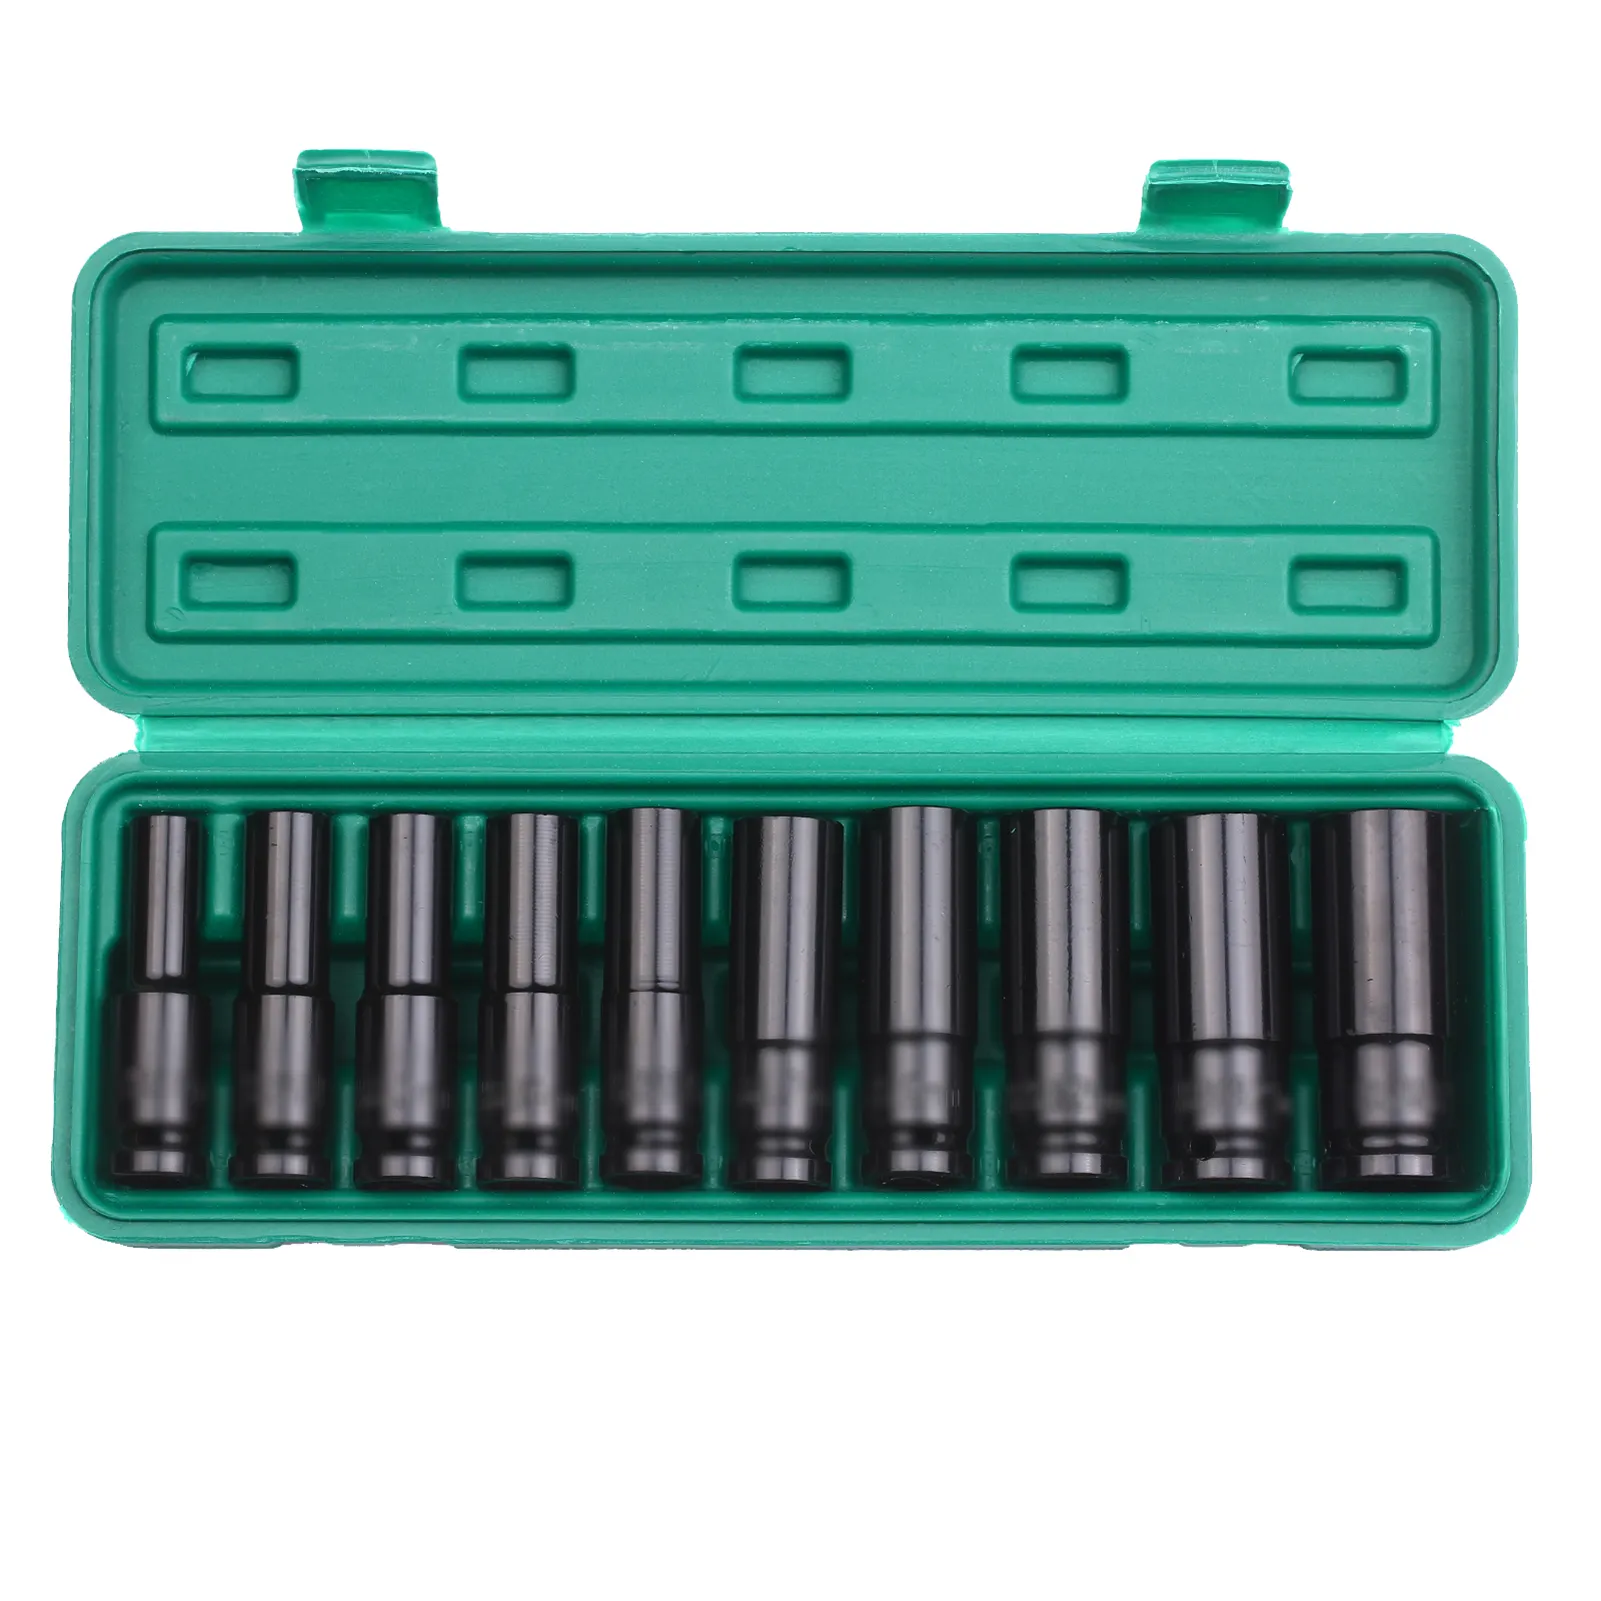 1/2Inch Drive Hex Impact Socket Set 10-Piece Deep Socket Metric Sizes 8-24mm CR-V Material with Storage Box